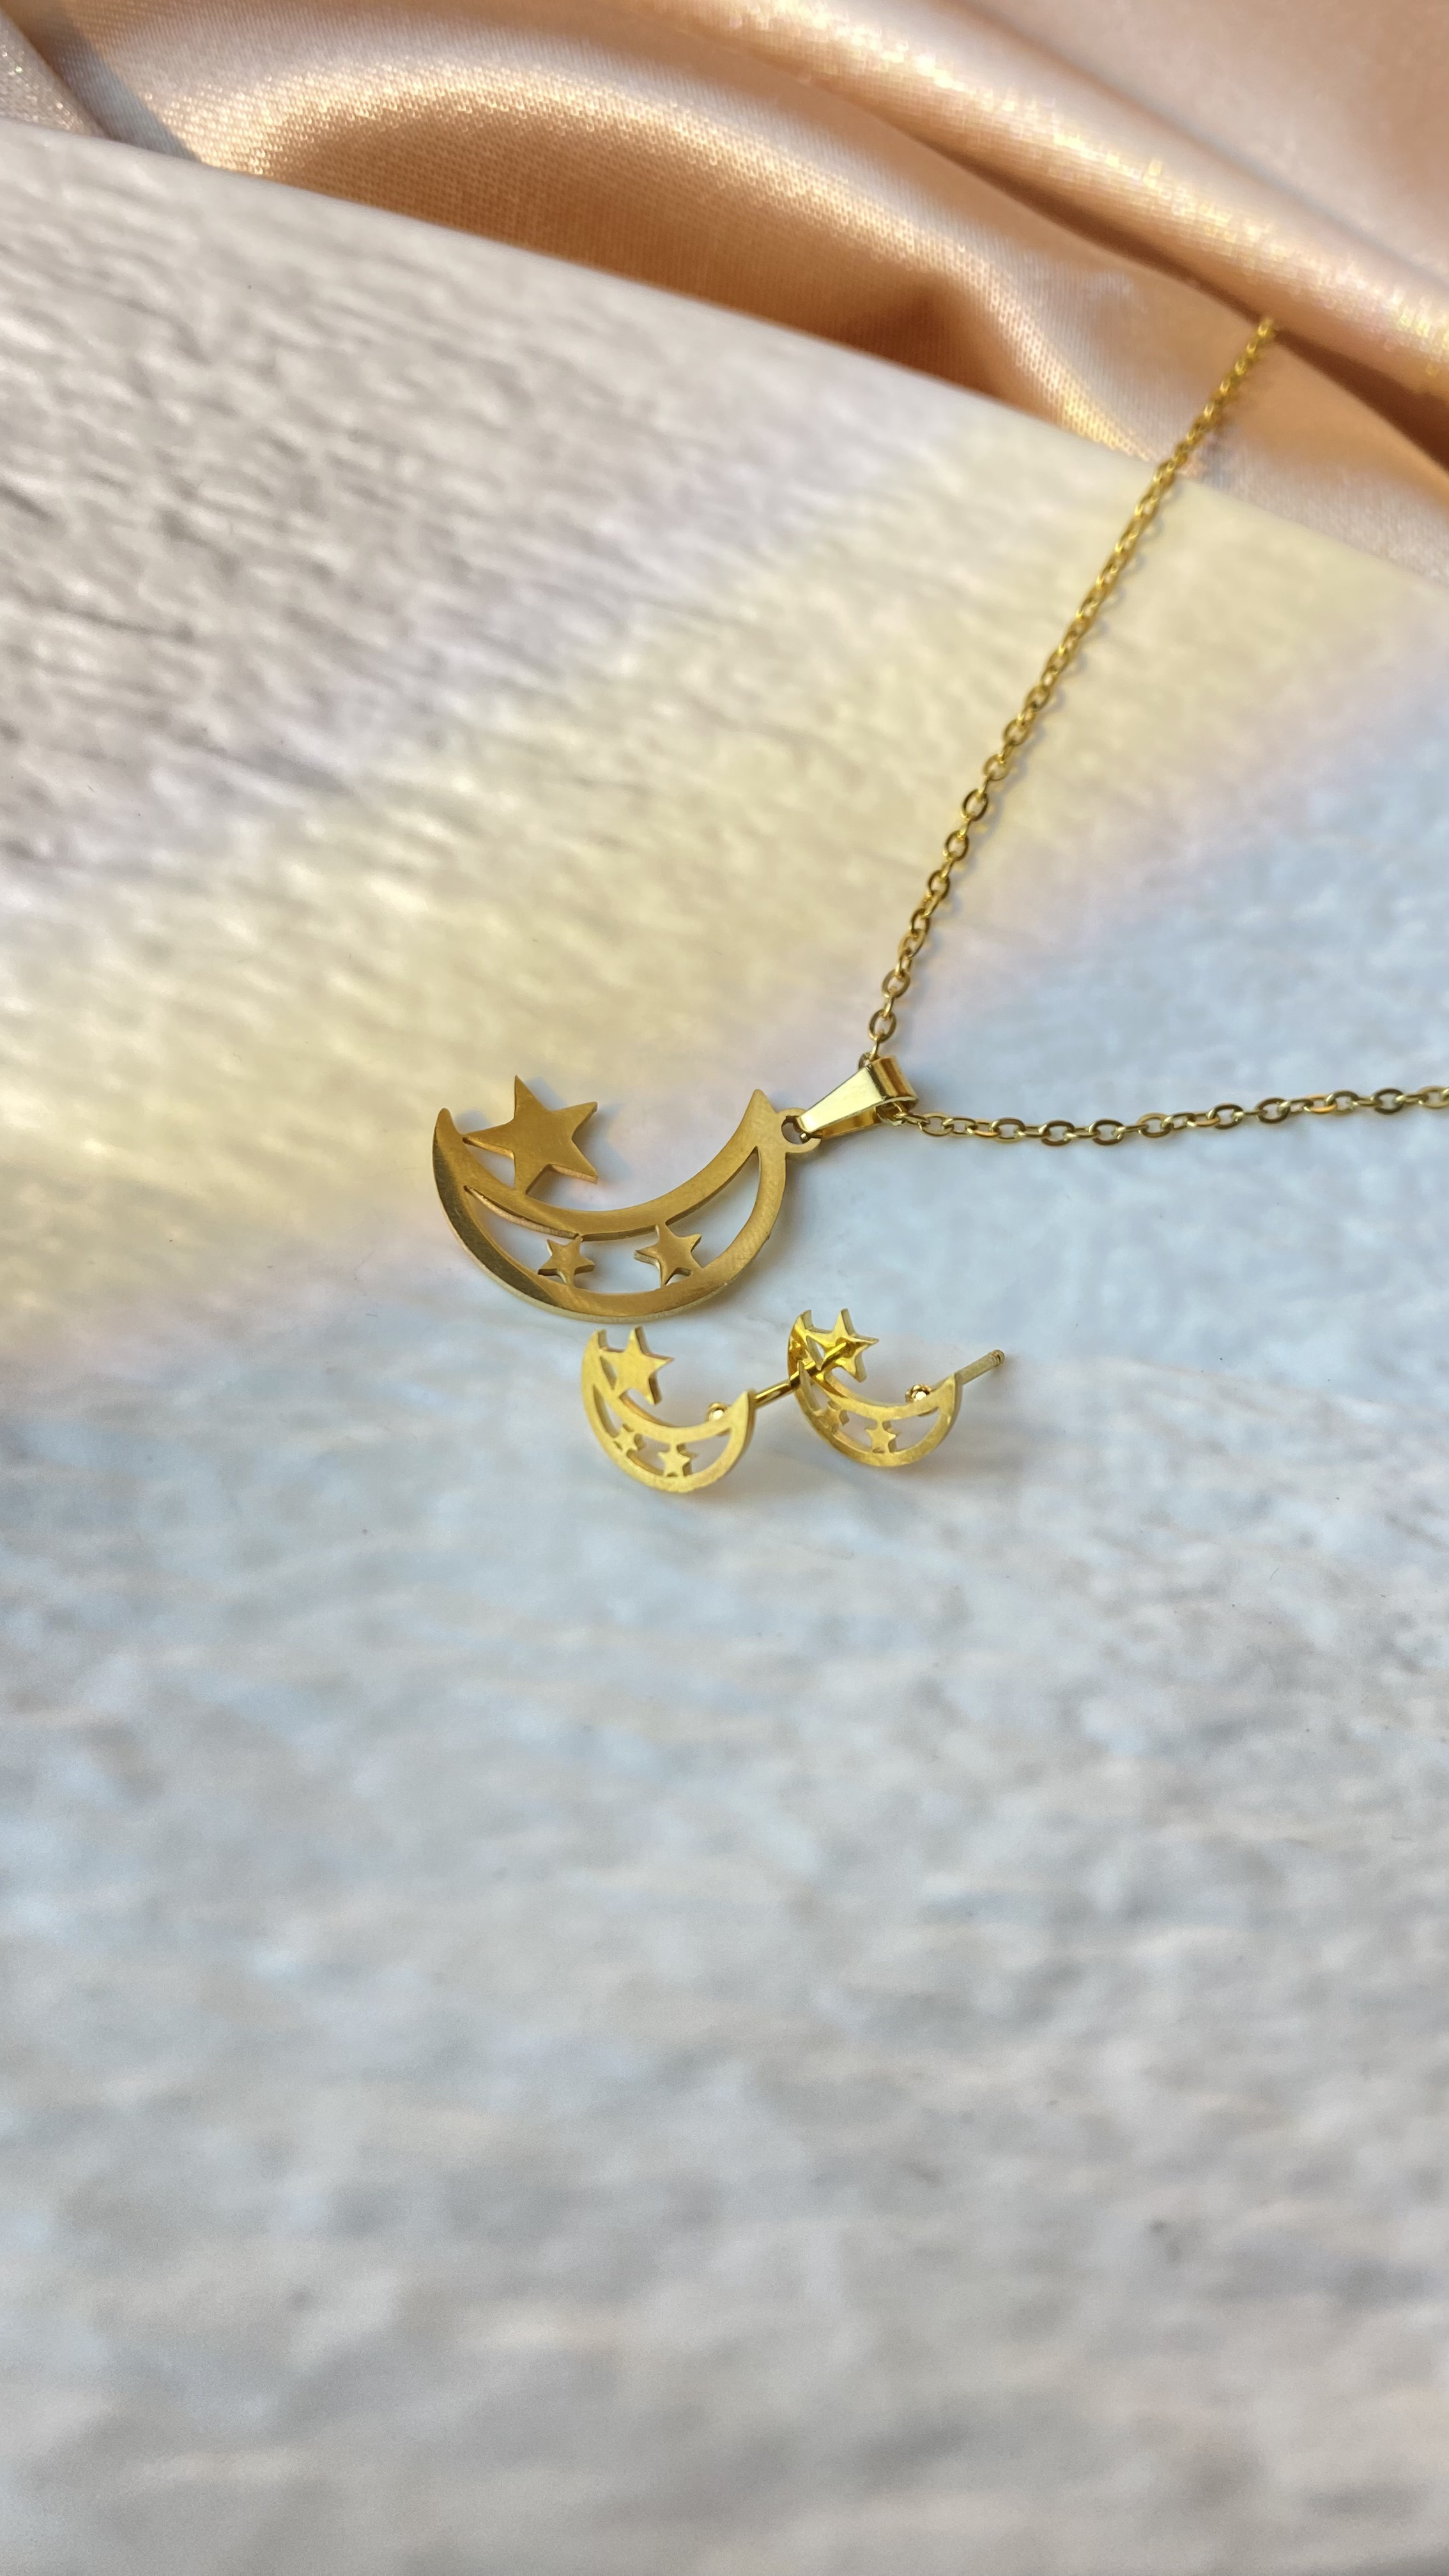 Moon and stars 14k gold plated necklace/earrings set, dainty jewelry